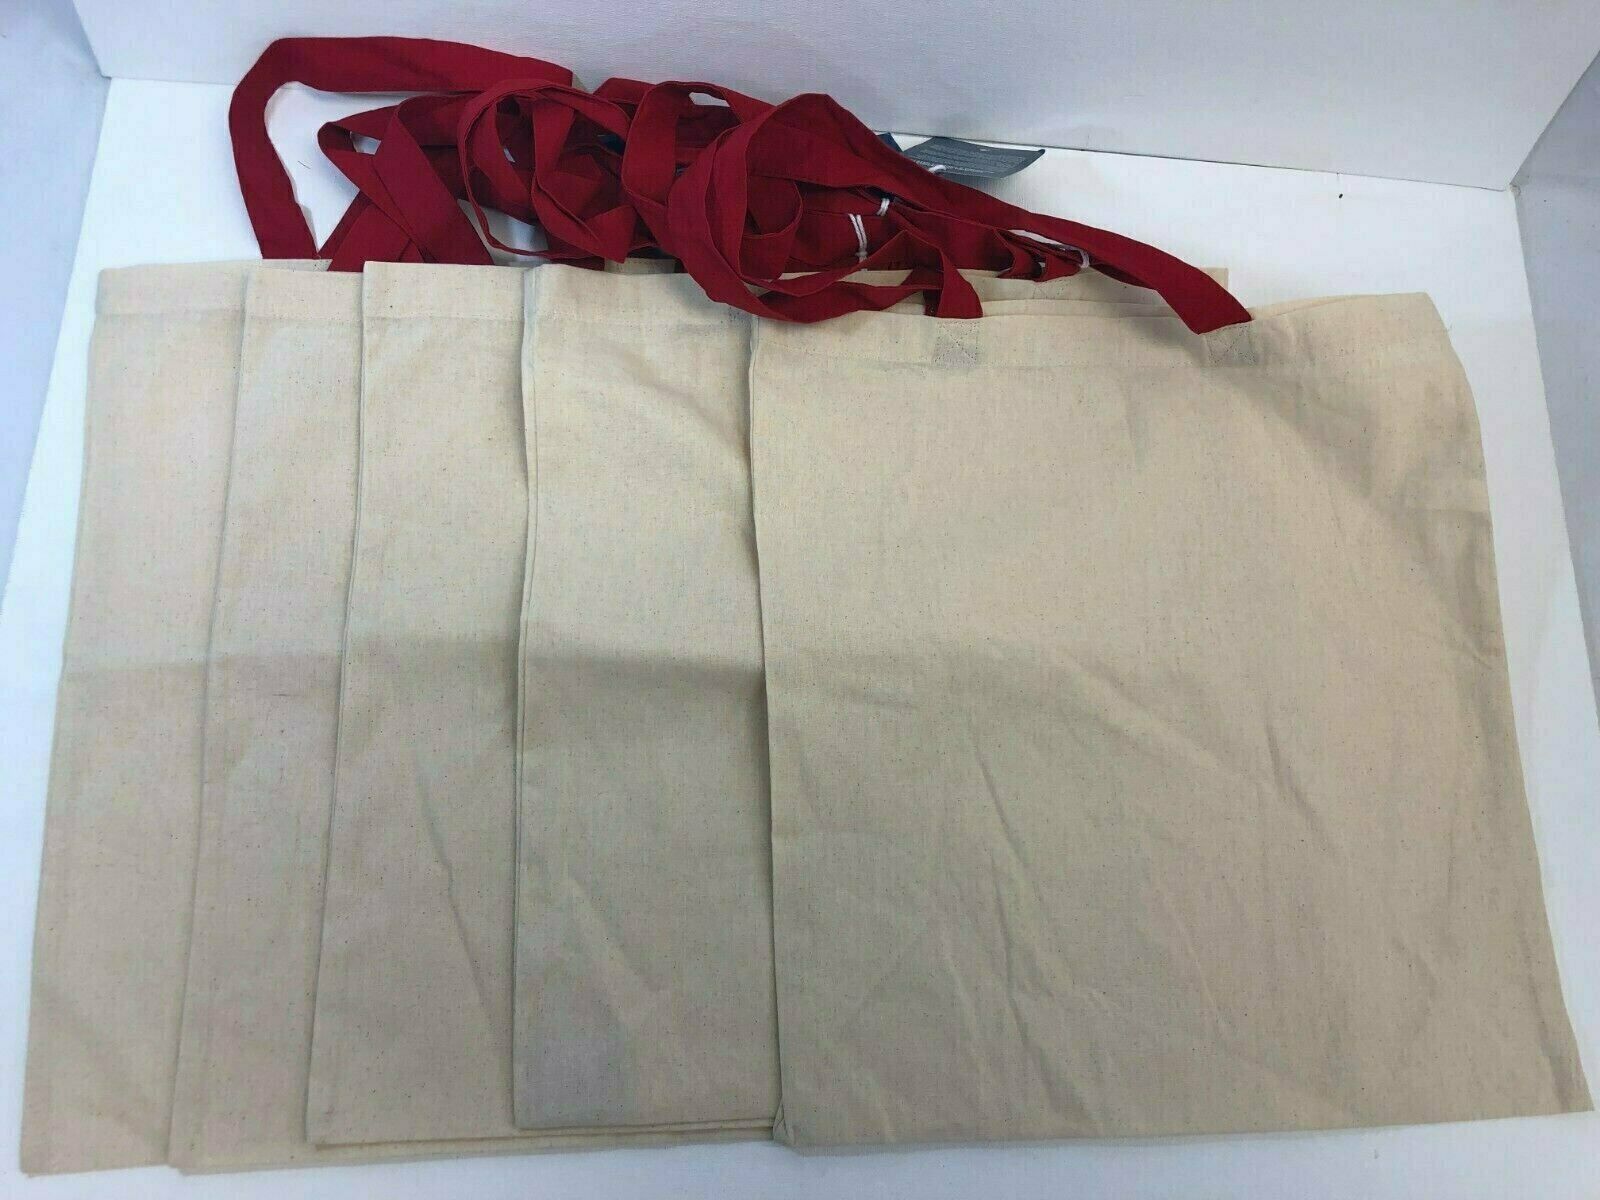 5-PACK Port Authority Cotton Canvas Budget Tote Bags - Natural/ Red, NOB - $8.99